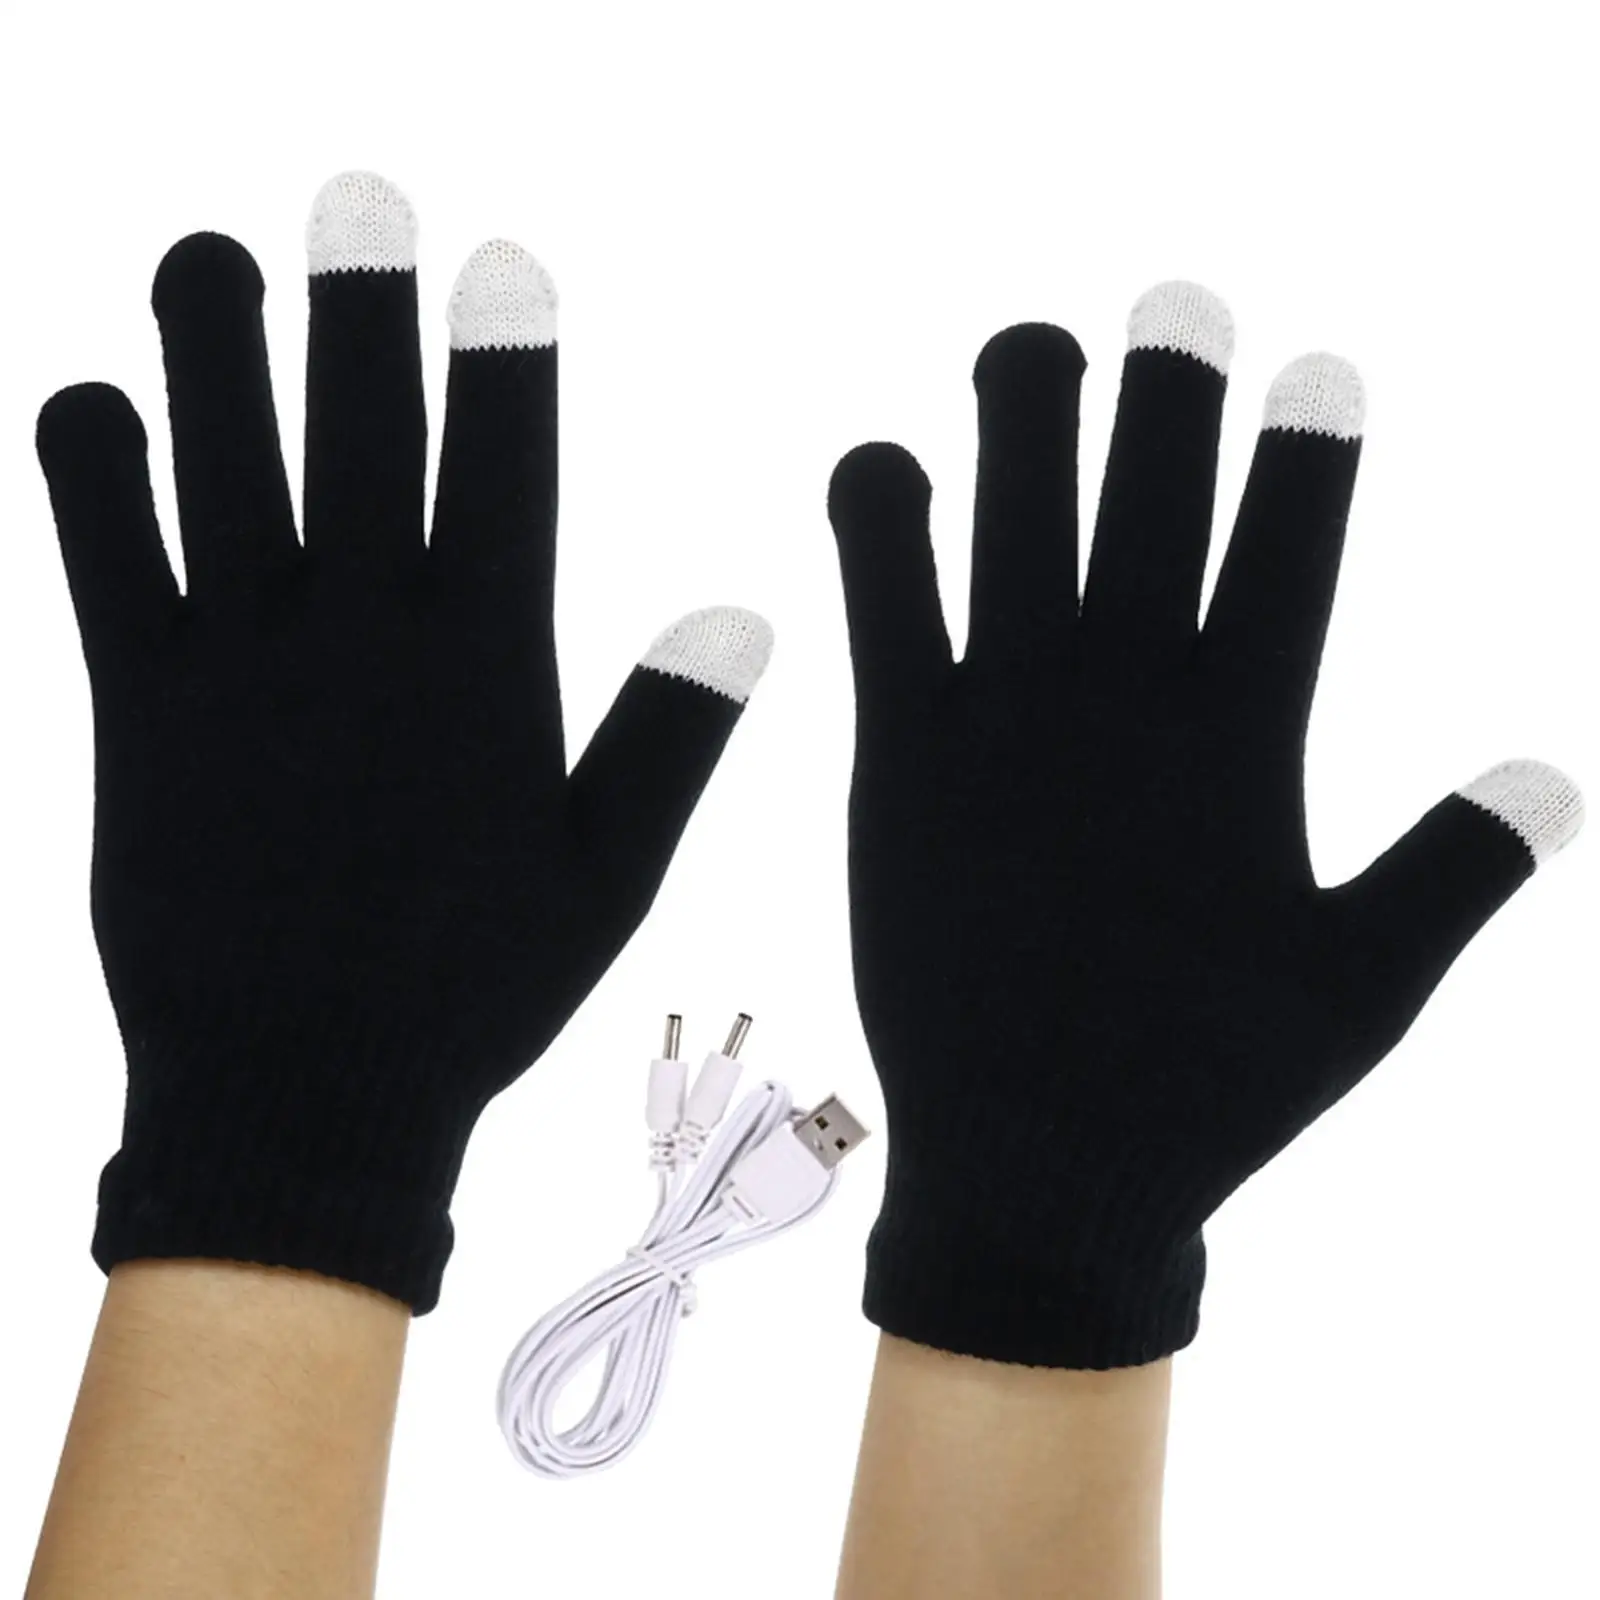 Unisex USB Heated Gloves Full Finger Winter Washable Design Knitting Thermal Laptop Gloves for Typing  Working Skiing Hiking